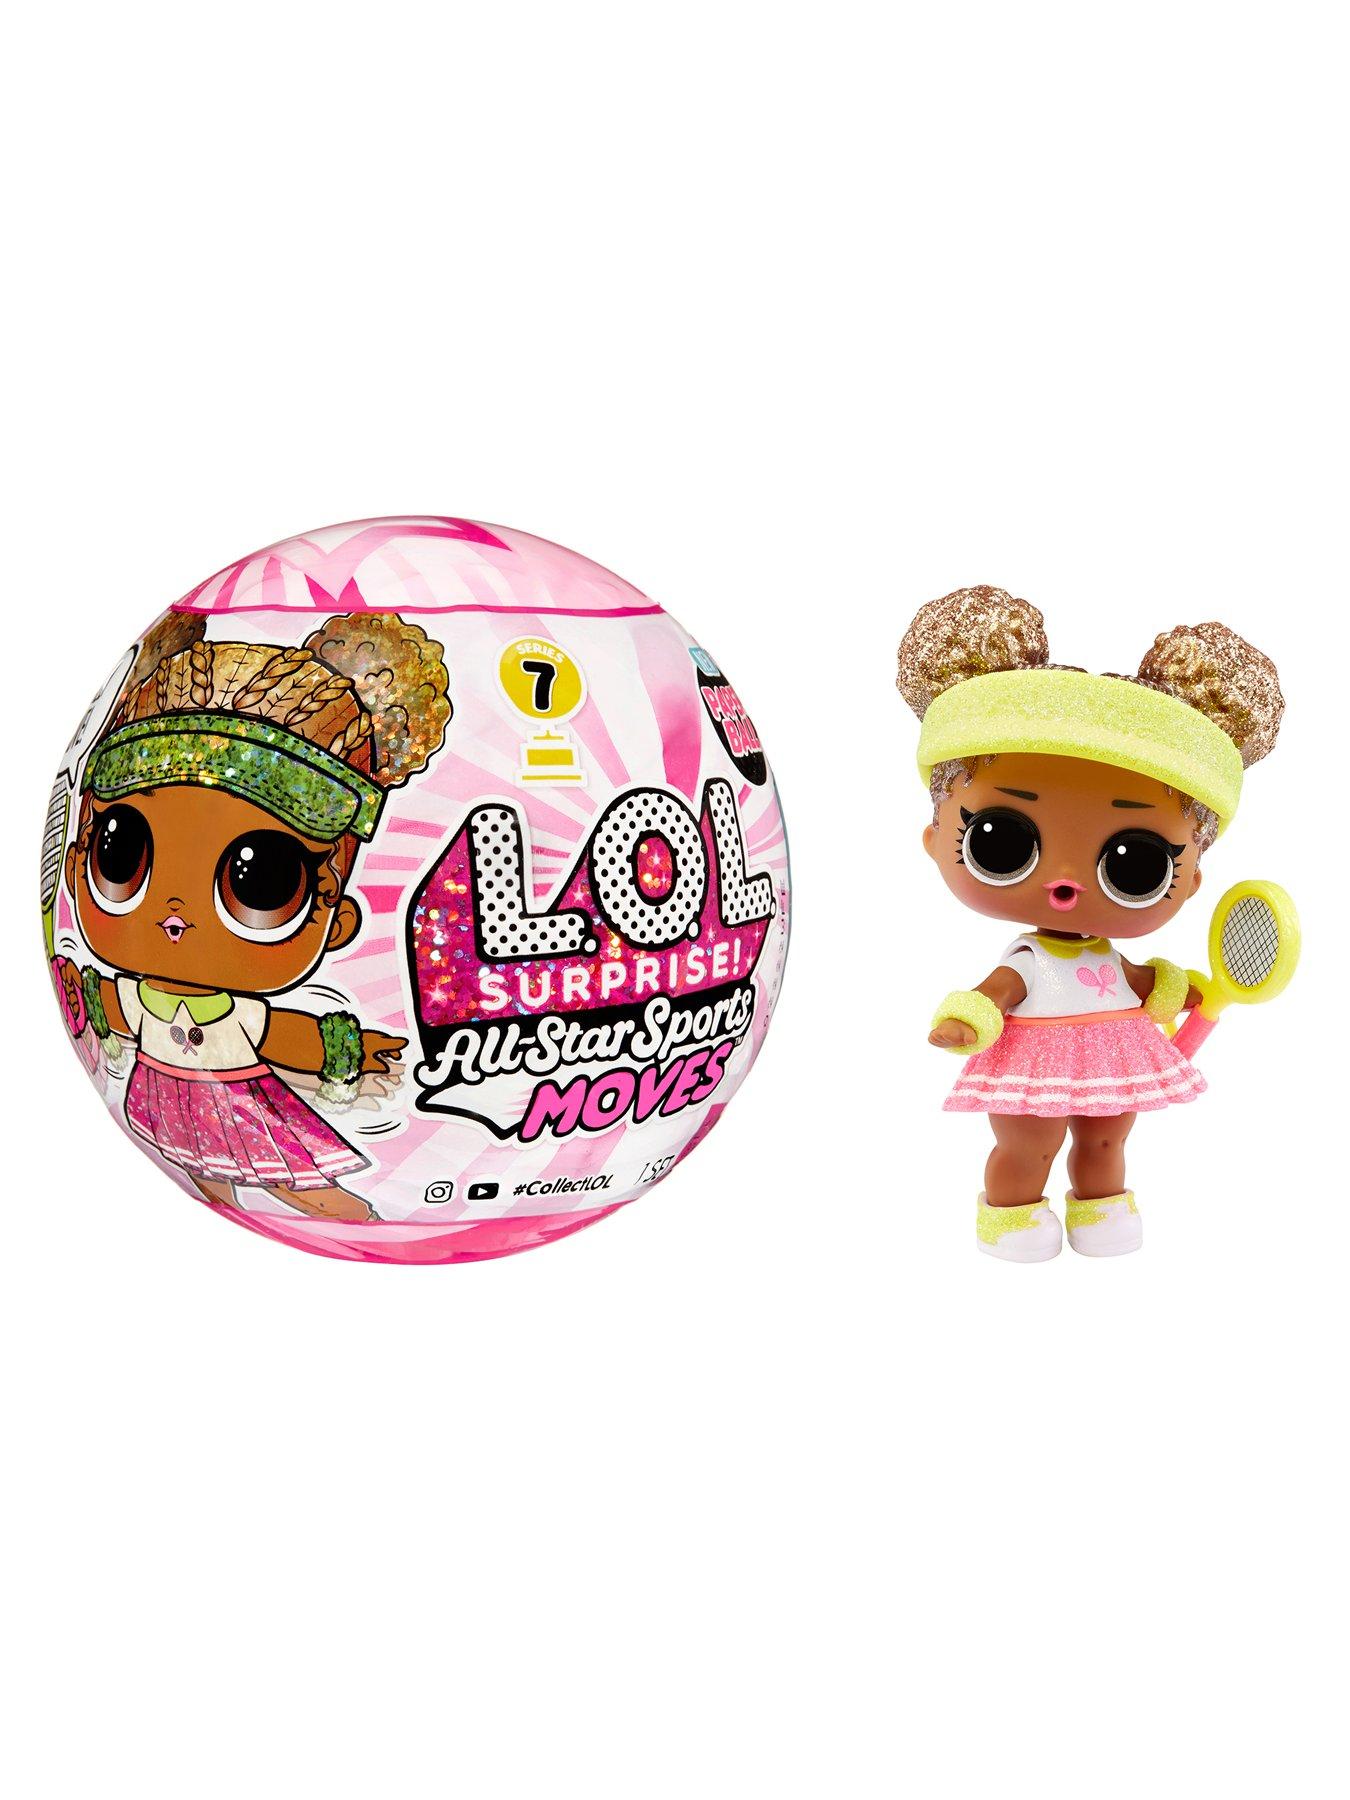 Clothes Outfit headband For Lol Surprise Dolls Fanime Series 2 accessory toy 